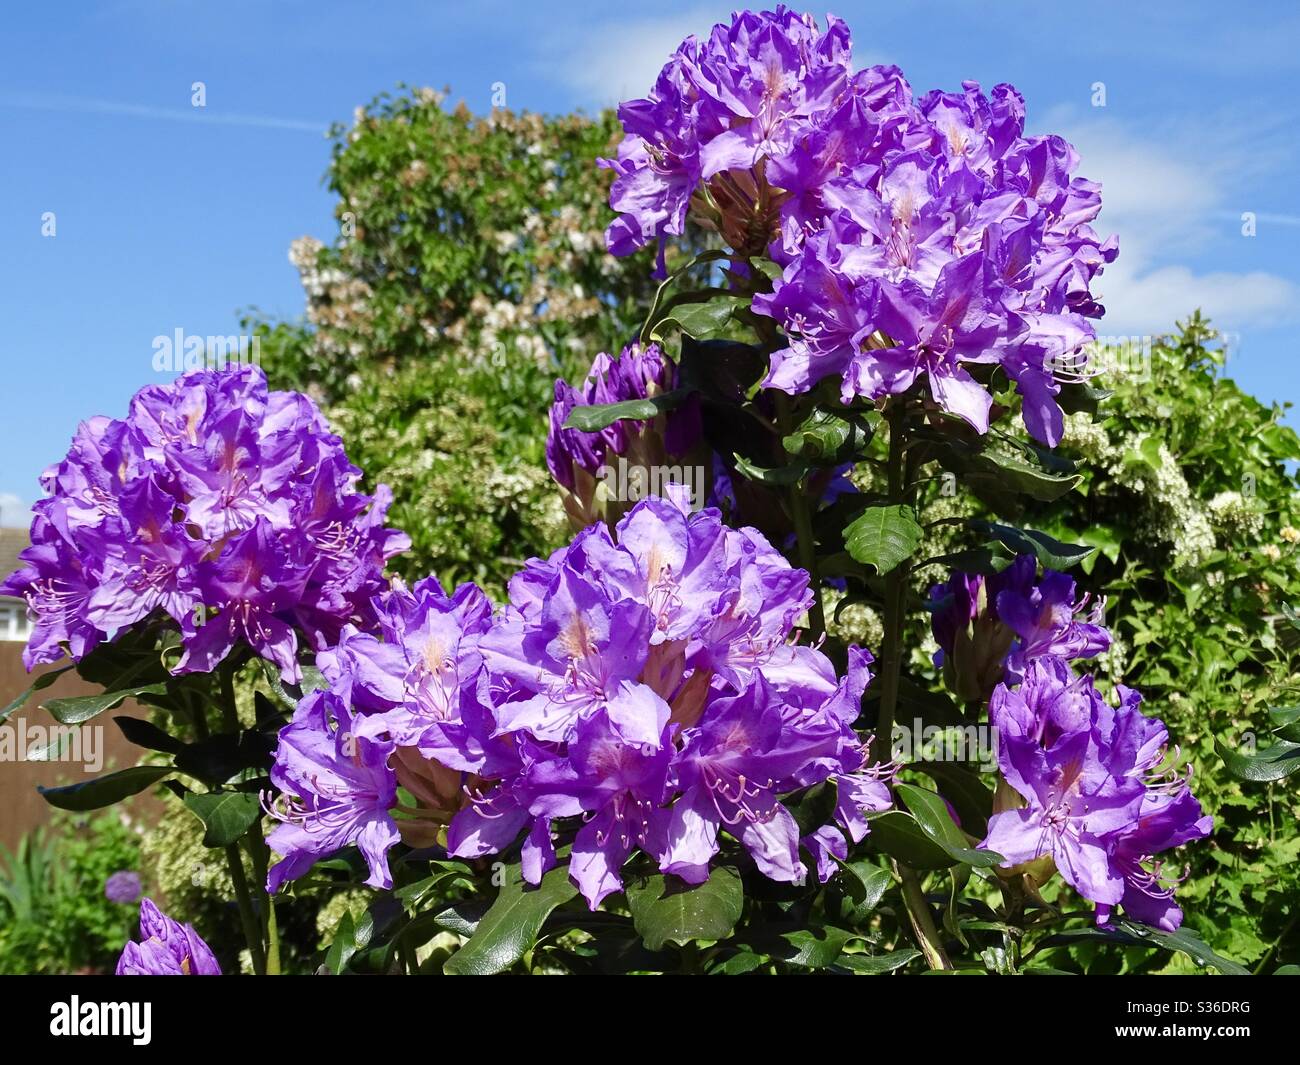 Beautiful lilac rhododendron flowers set against a blue sky in the spring sunshine Stock Photo